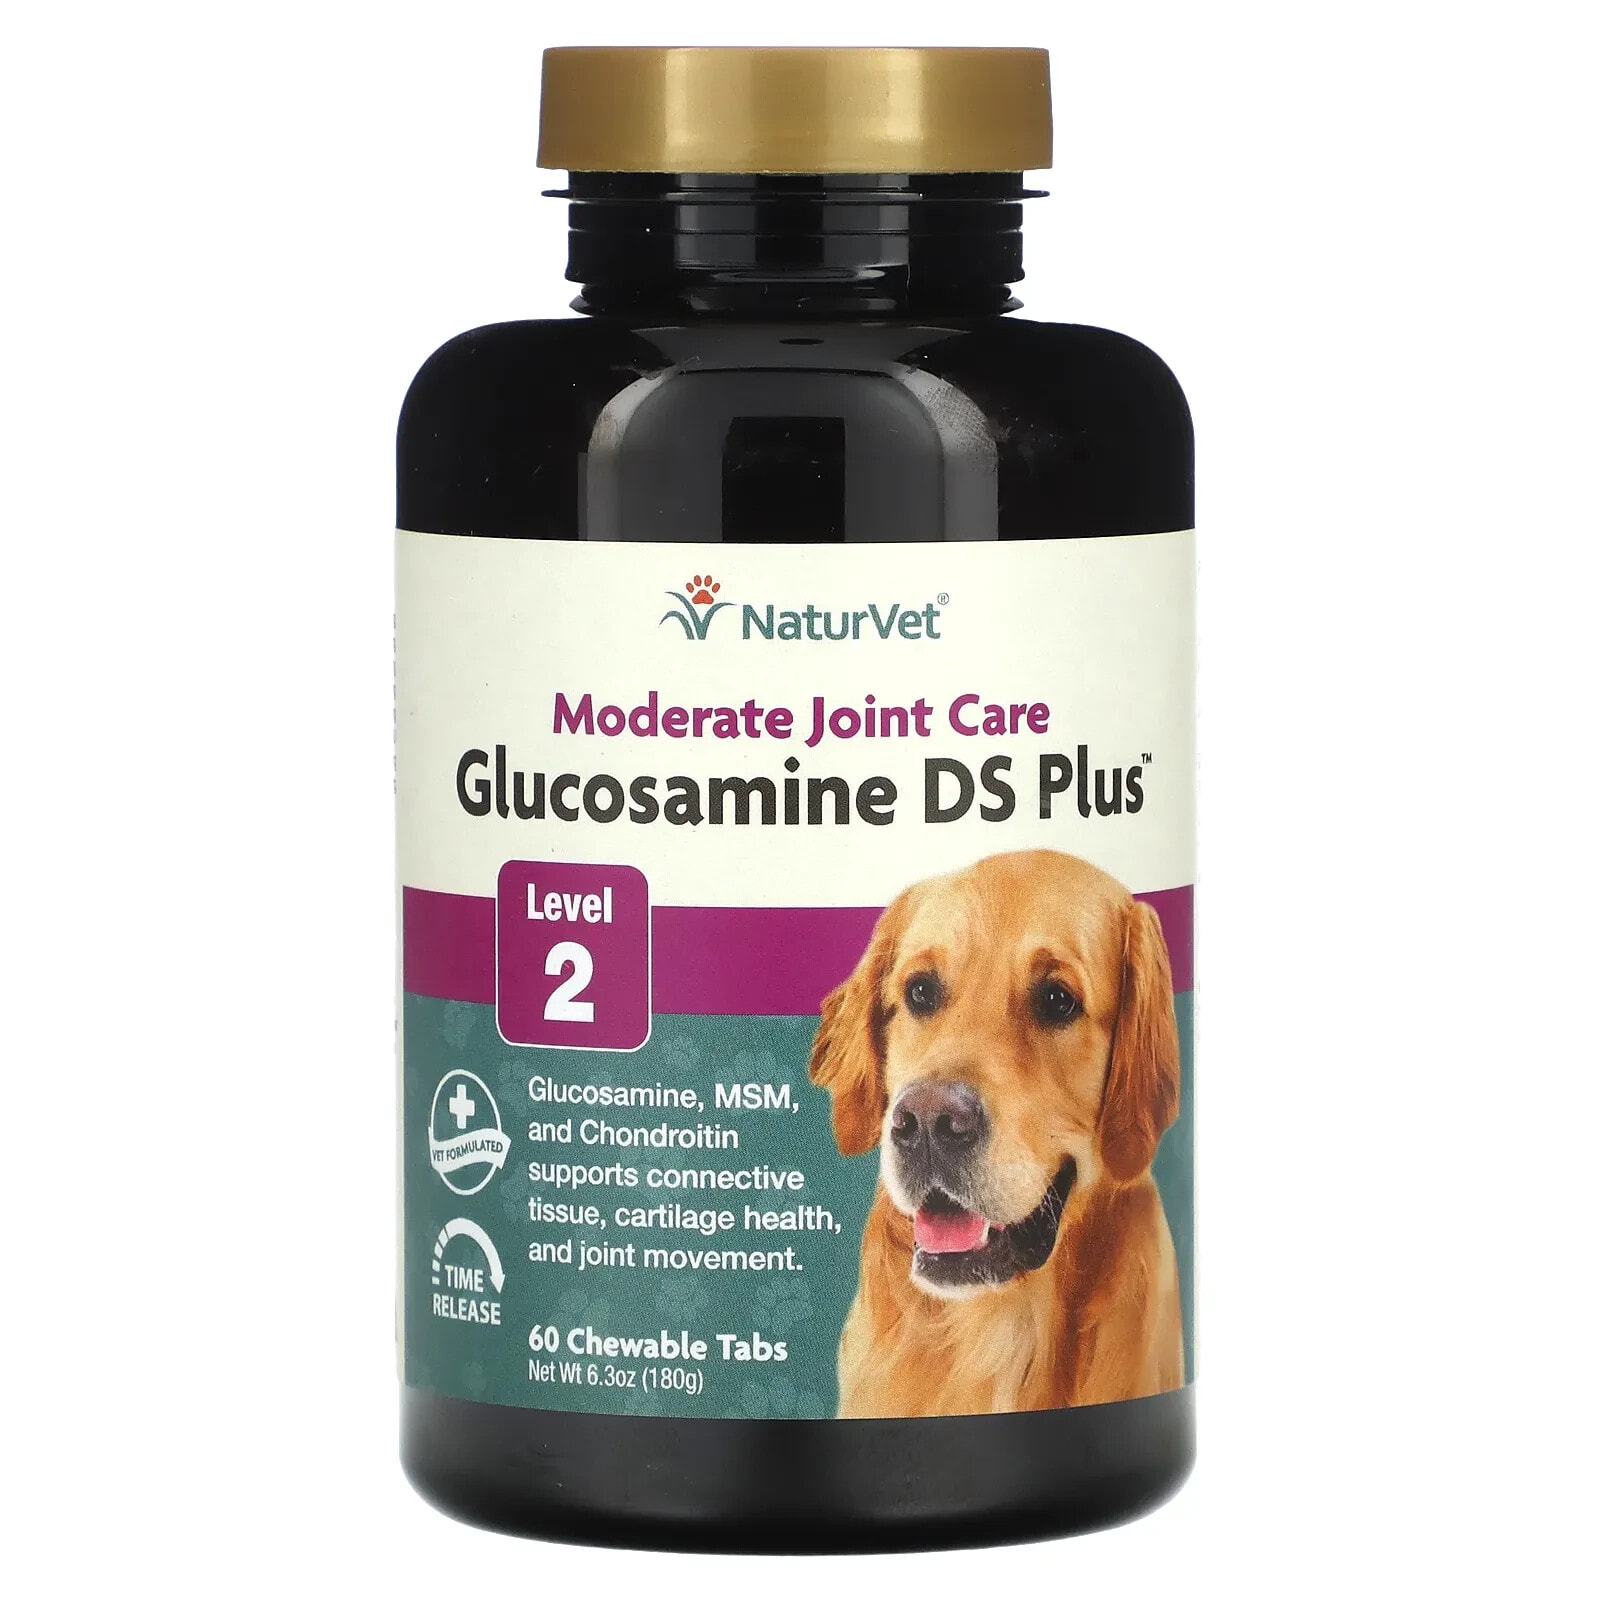 Glucosamine DS Plus, Moderate Joint Care, Level 2, For Dogs & Cats, 60 Chewable Tablets, 6.3 oz (180 g)